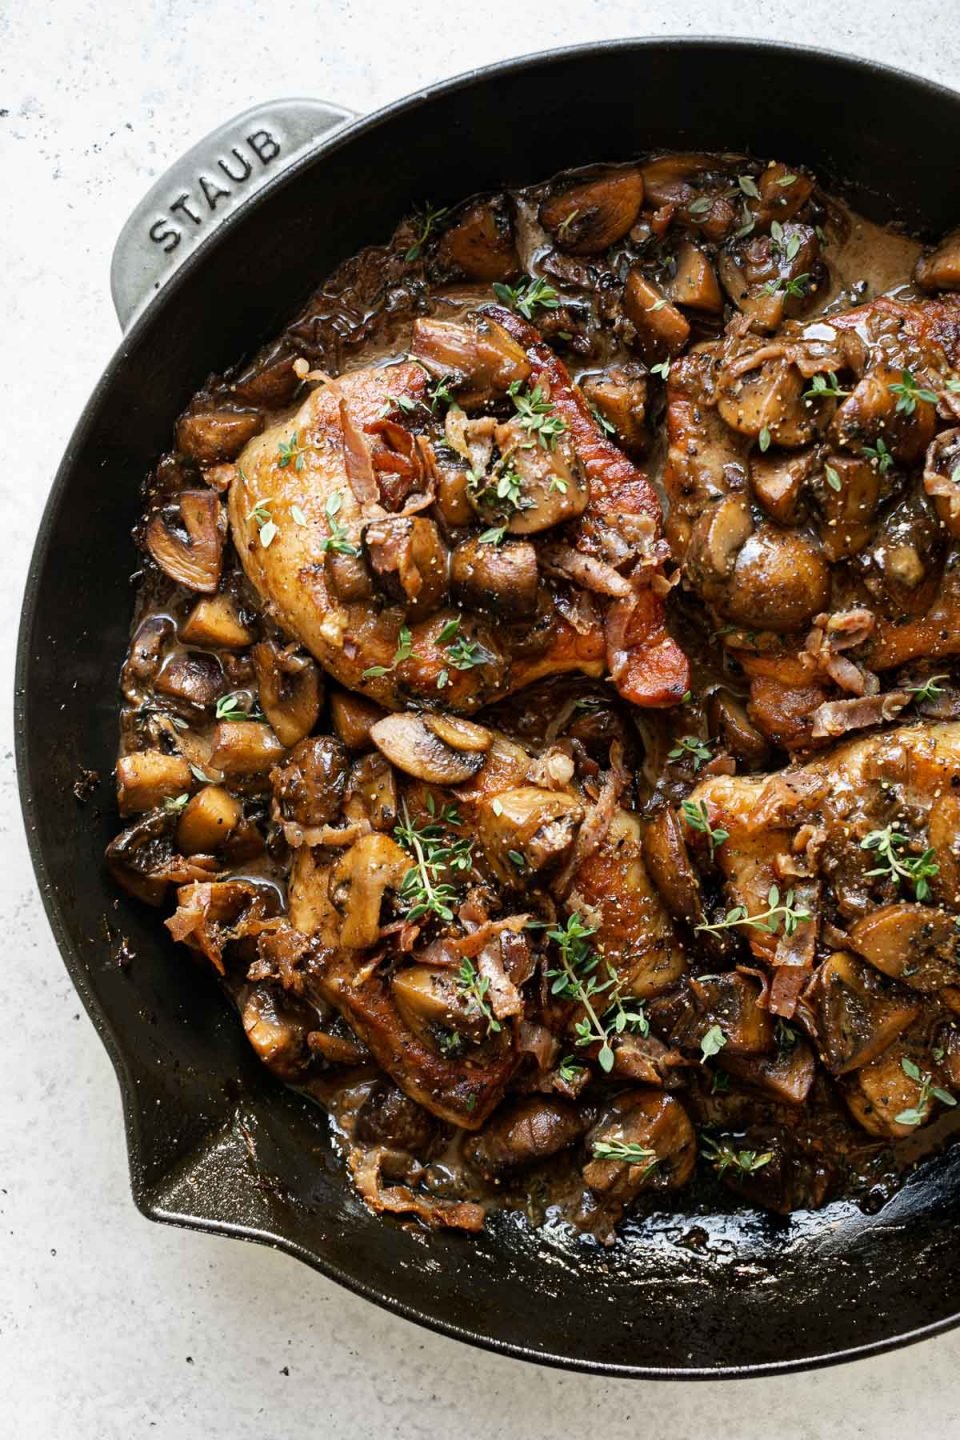 Pork marsala with mushrooms & creamy marsala sauce in large gray Staub skillet. The pork chops are topped with caramelized mushrooms, crispy prosciutto & fresh thyme. The skillet sits atop a white surface.